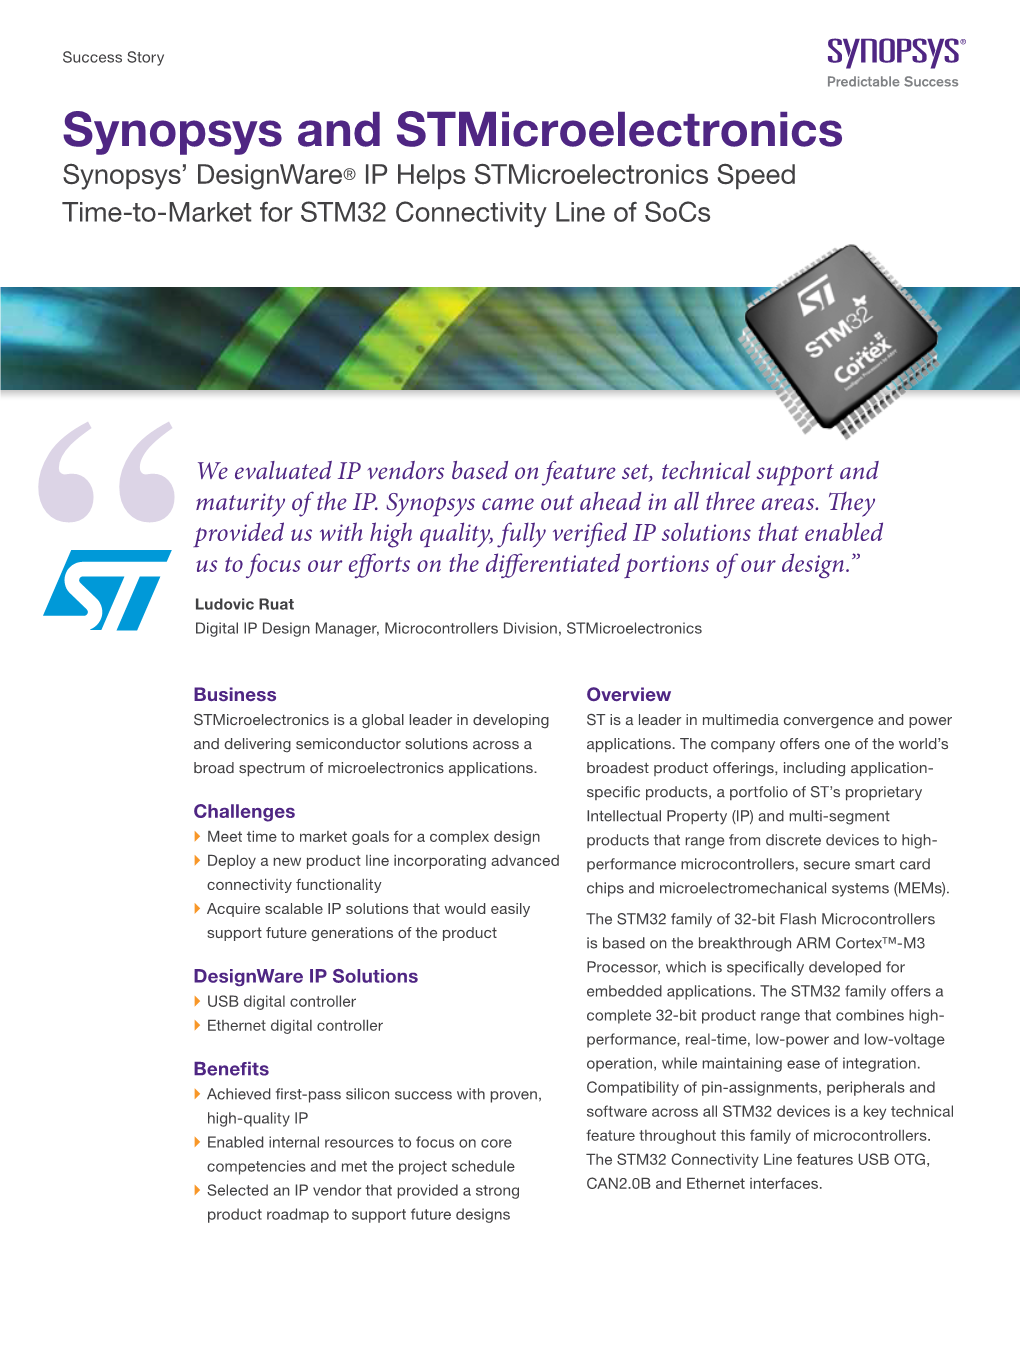 Synopsys and Stmicroelectronics Synopsys’ Designware® IP Helps Stmicroelectronics Speed Time-To-Market for STM32 Connectivity Line of Socs